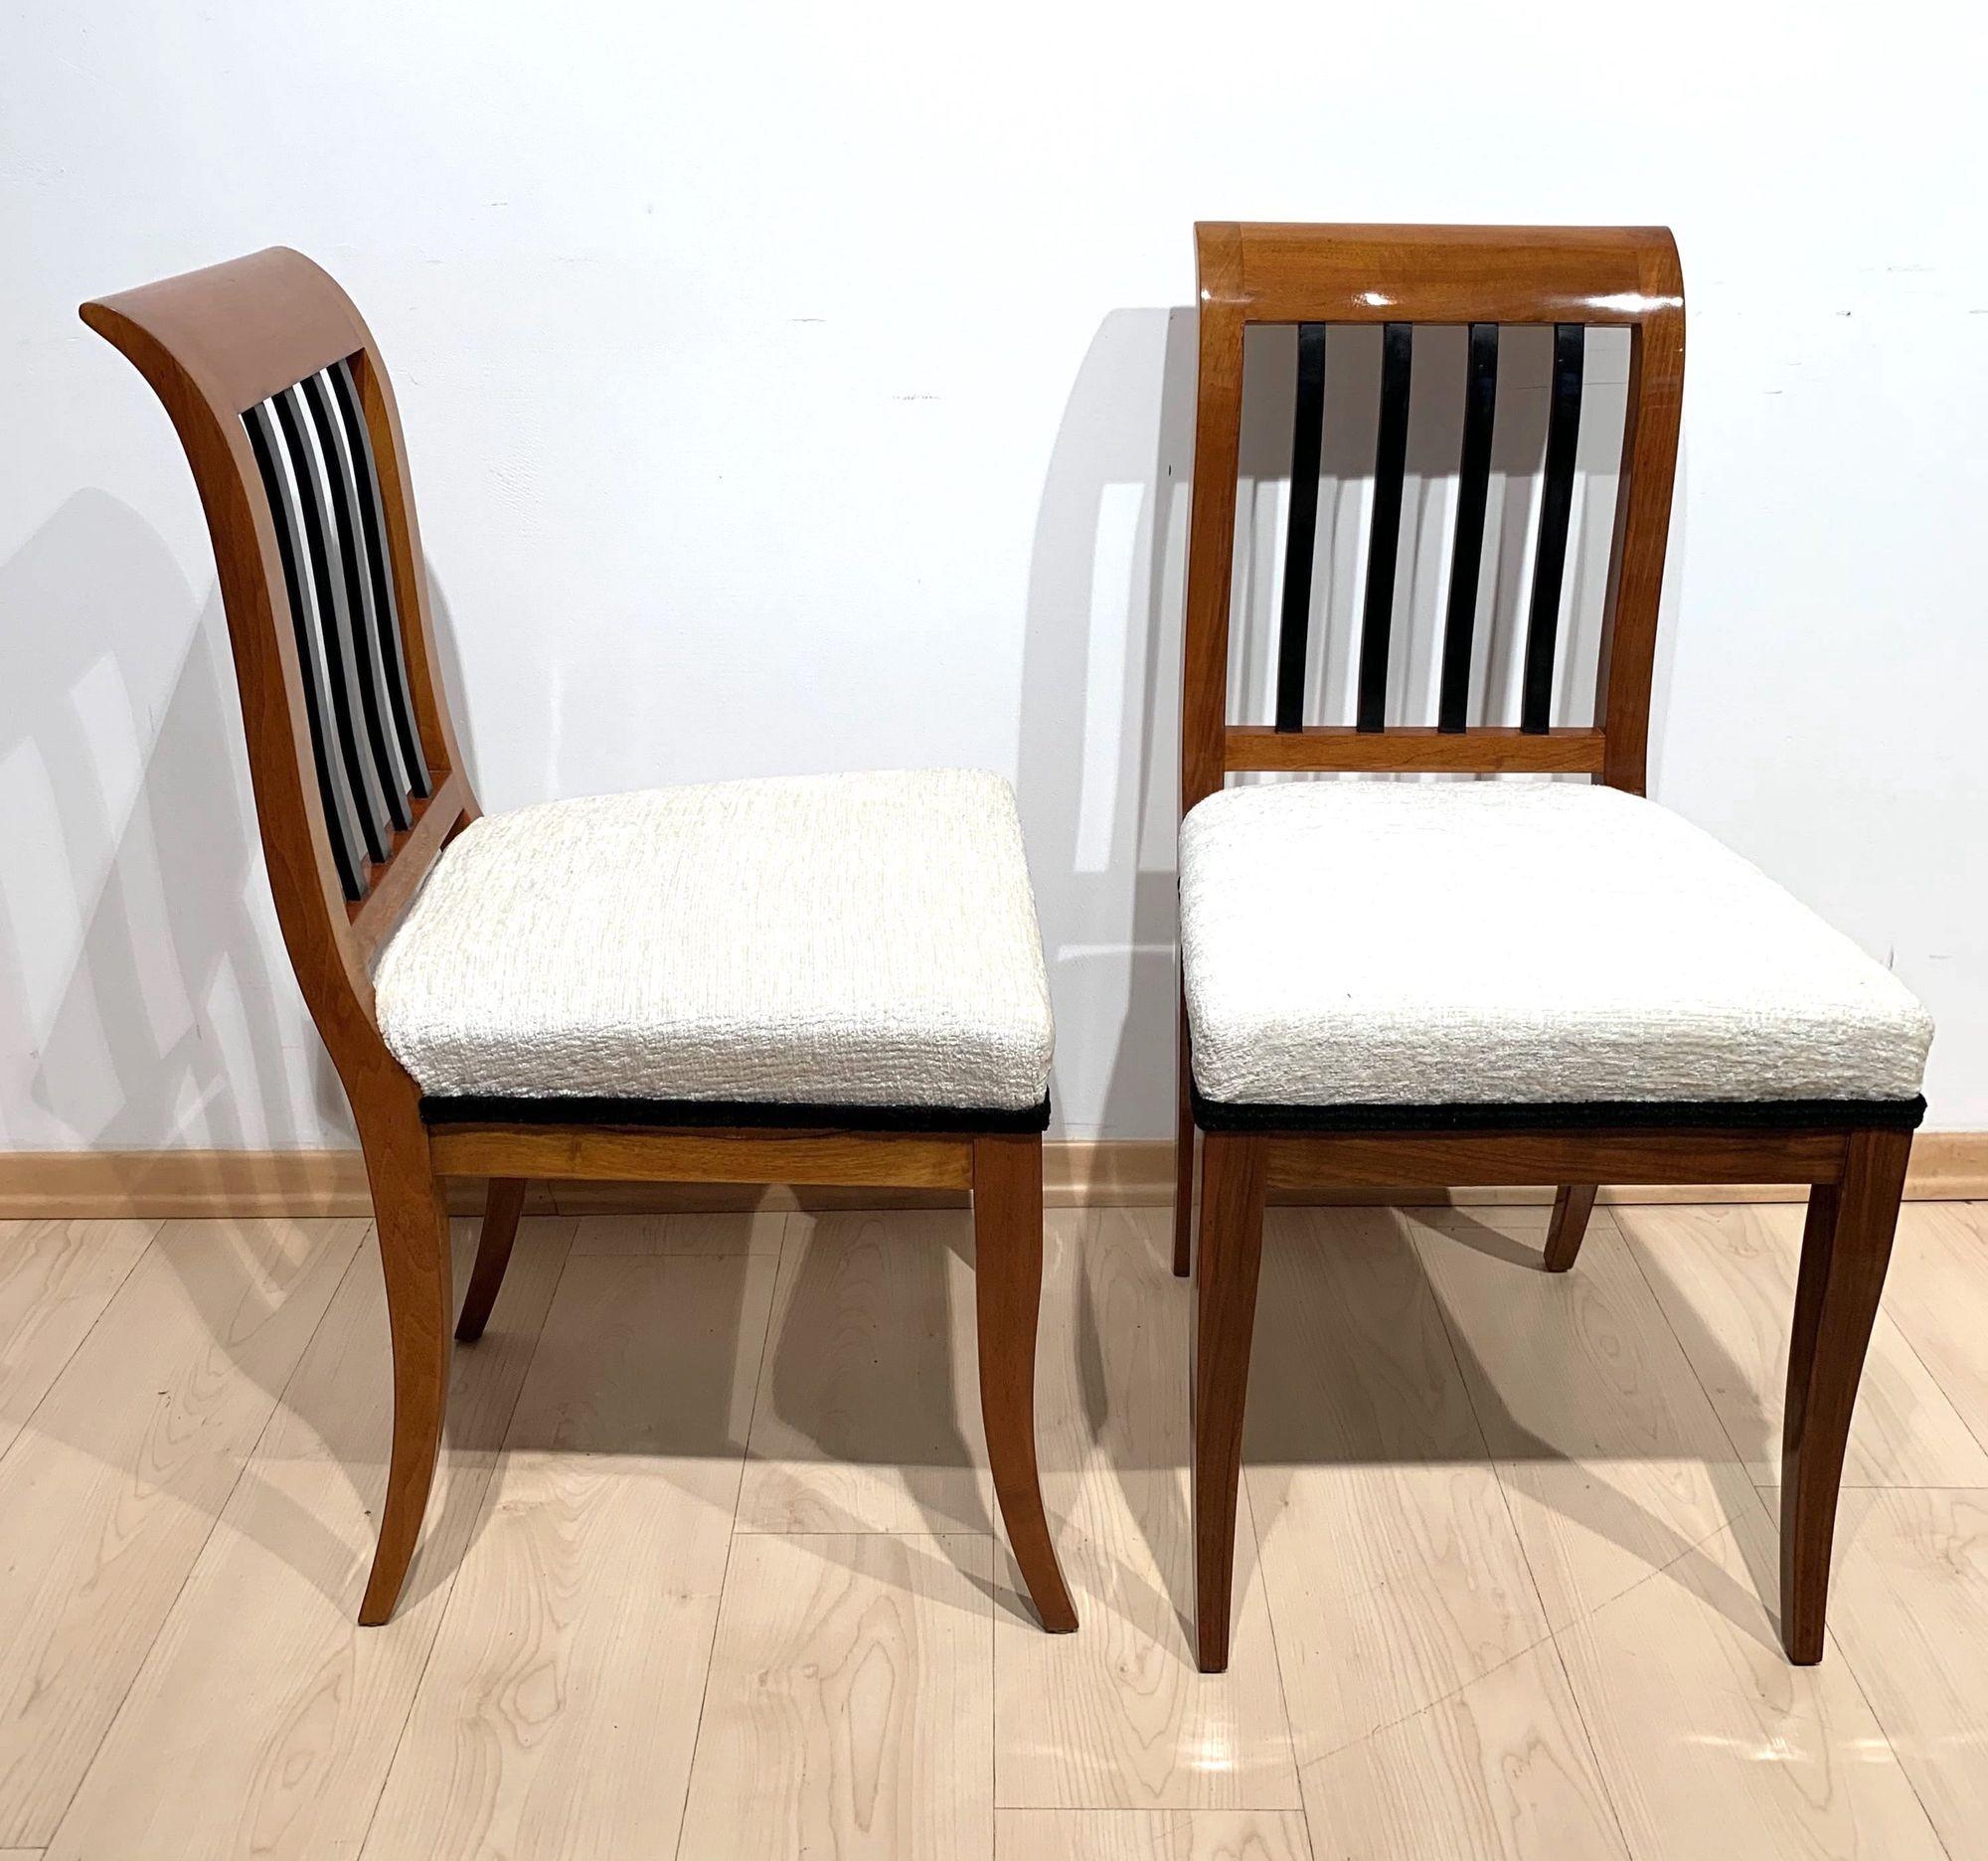 Early 19th Century Pair of Biedermeier Side Chairs, Solid Walnut, Franconia, Germany, circa 1825 For Sale